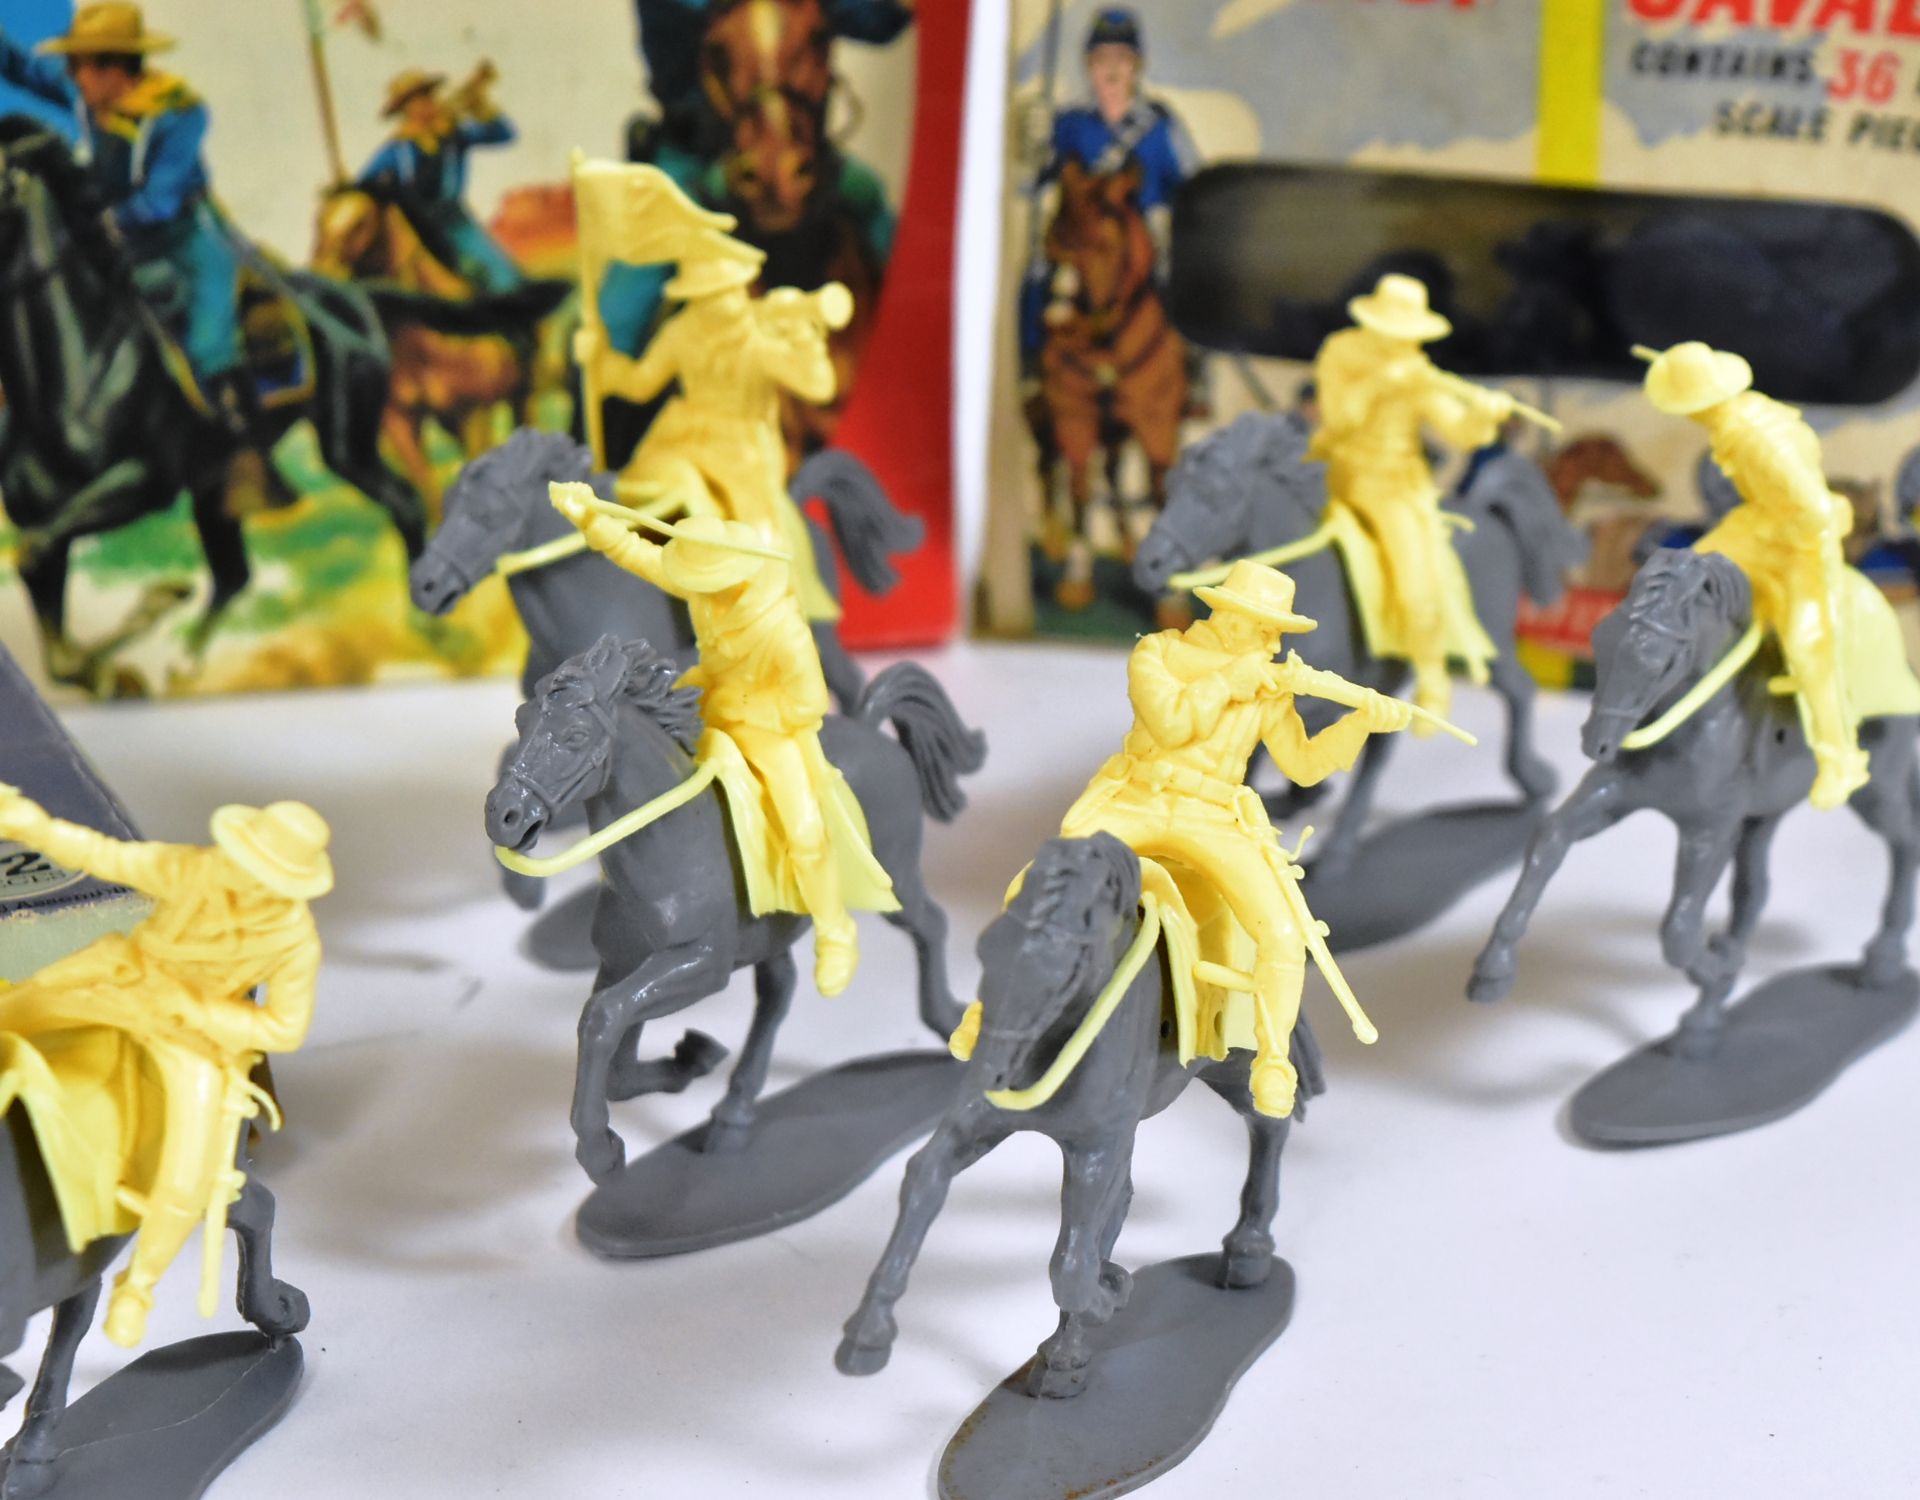 AIRFIX - WILD WEST - COLLECTION OF PLASTIC FIGURES - Image 4 of 5